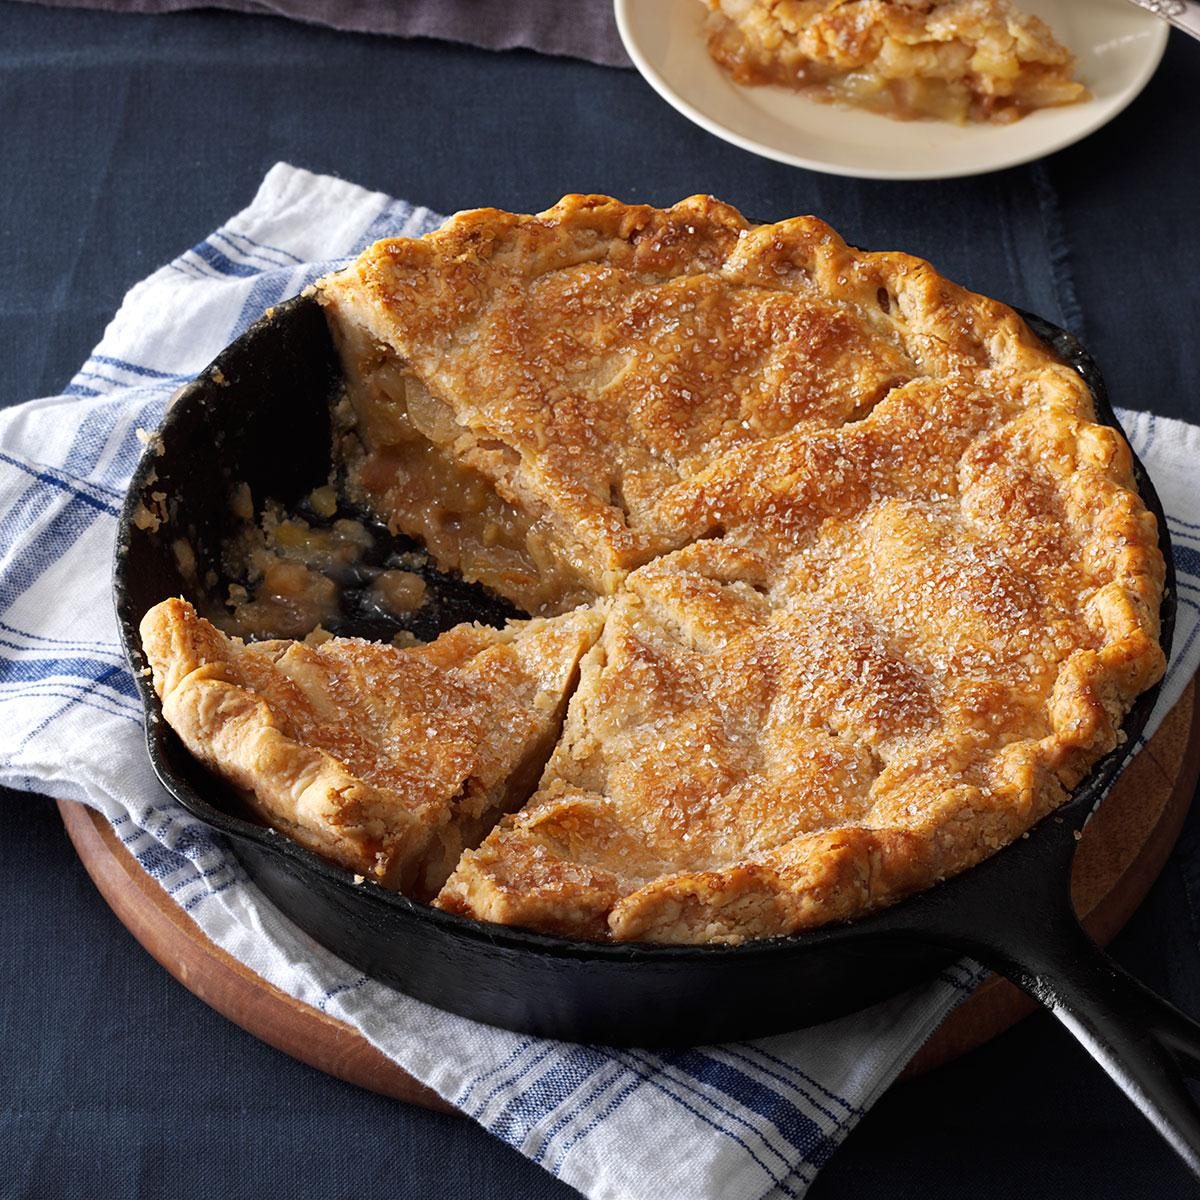 15 Cast-Iron Pies to Turn Your Skillet to the Sweet Side